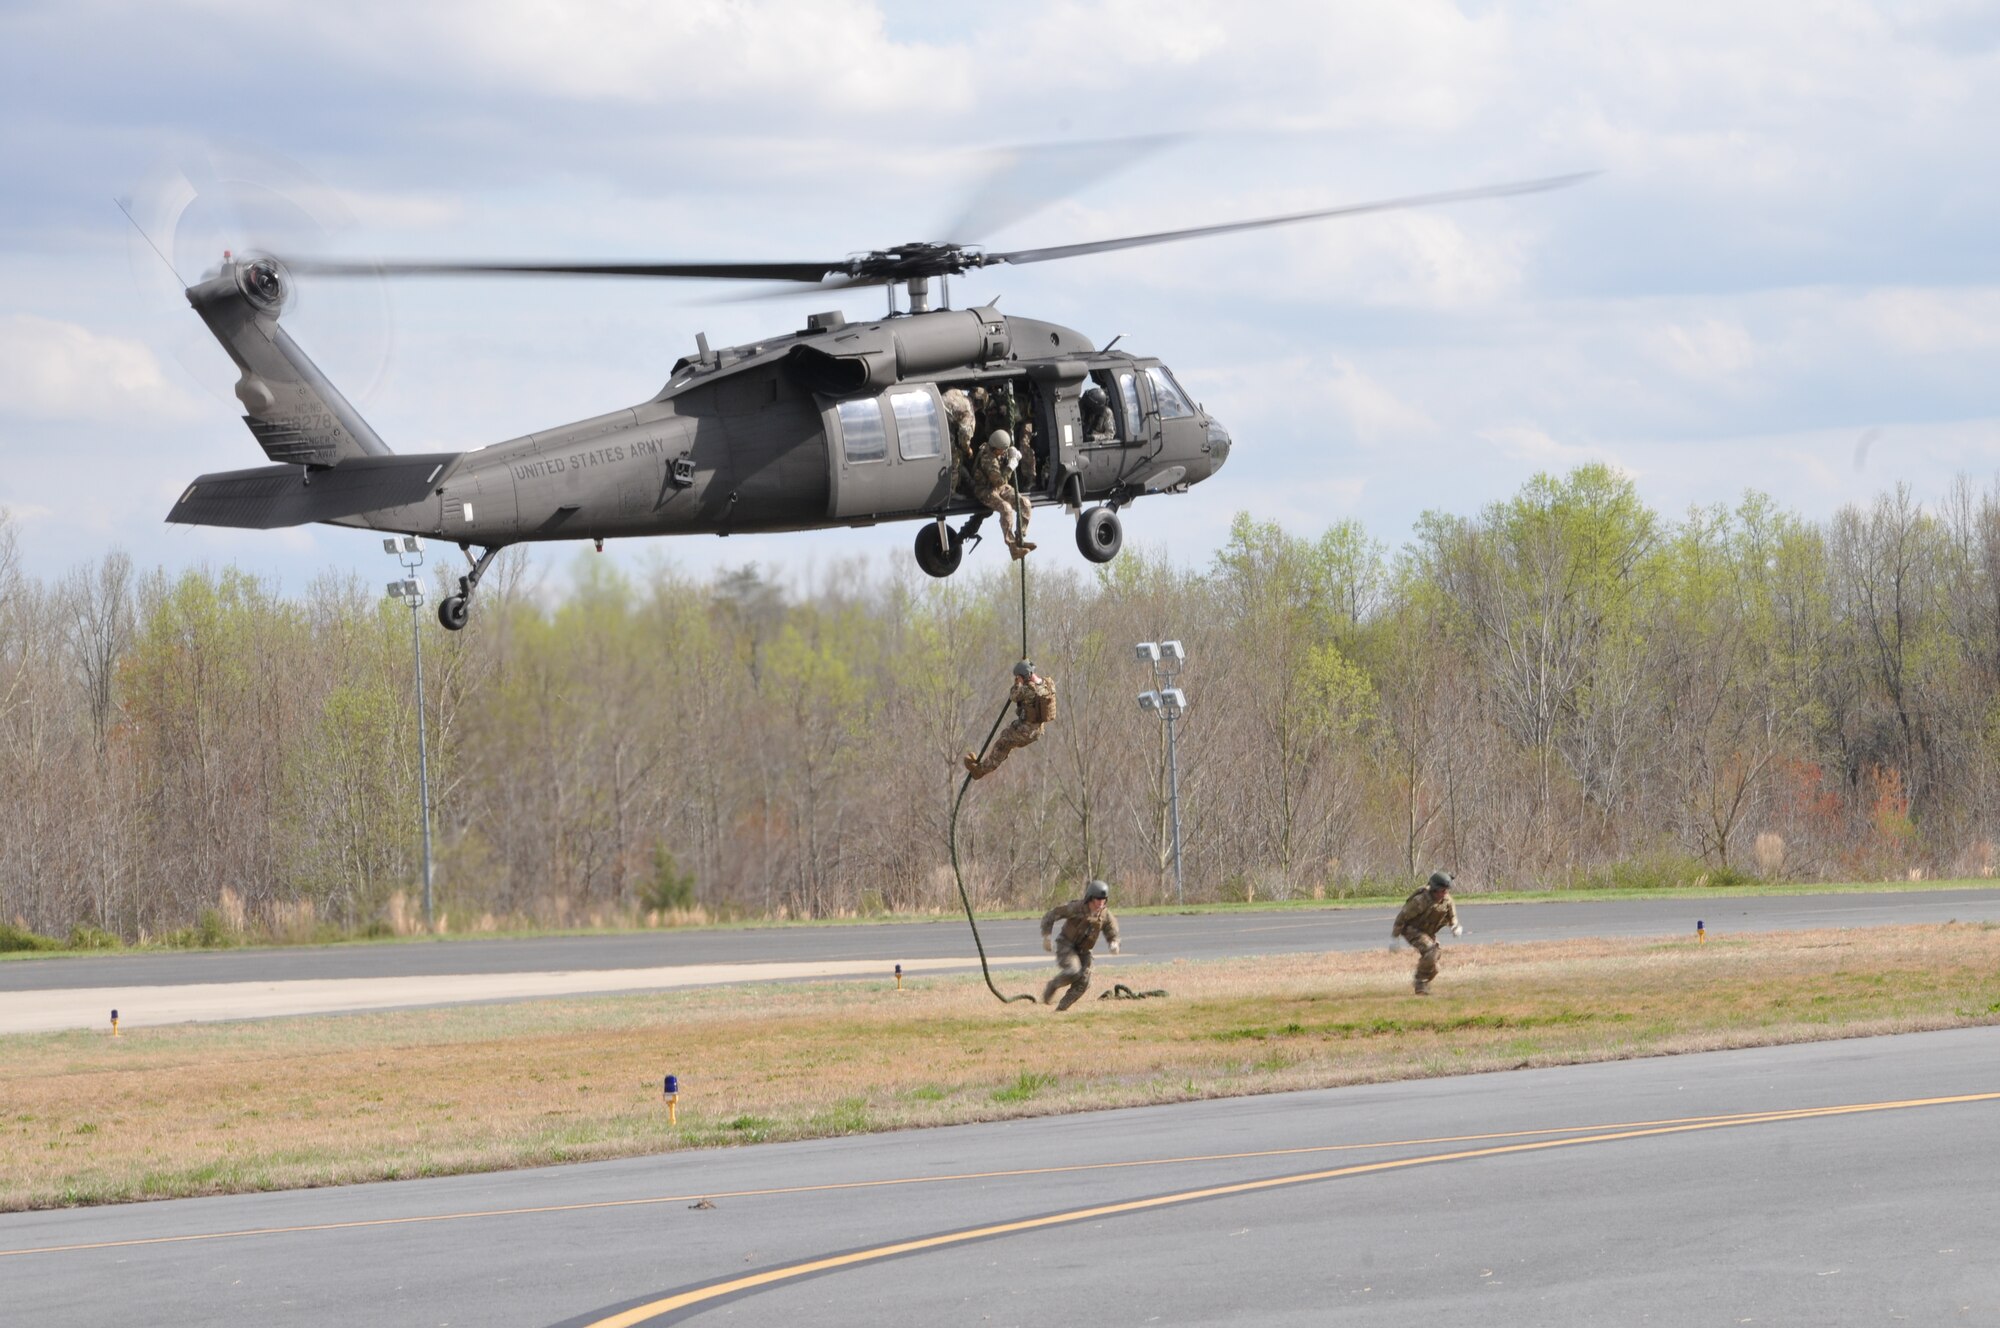 Members of the 118th Air Support Operations Squadron conduct FAST rope insertions at Stanly County Airport, New London, N.C., from an UH-60 Blackhawk helicopter of Company C, 1-131 AVN; North Carolina Army National Guard, April 8, 2014. Fast-roping, also known as Fast Rope Insertion Extraction System (FRIES) is a technique for descending a thick rope. It is useful for deploying troops from a helicopter in places where the helicopter itself cannot touchdown. The joint training mission allows both air and ground crews to hone their skills in planning and executing an air assault. (U.S. Air National Guard photo by Master Sgt. Patricia F. Moran, 145th Public Affairs/Released)